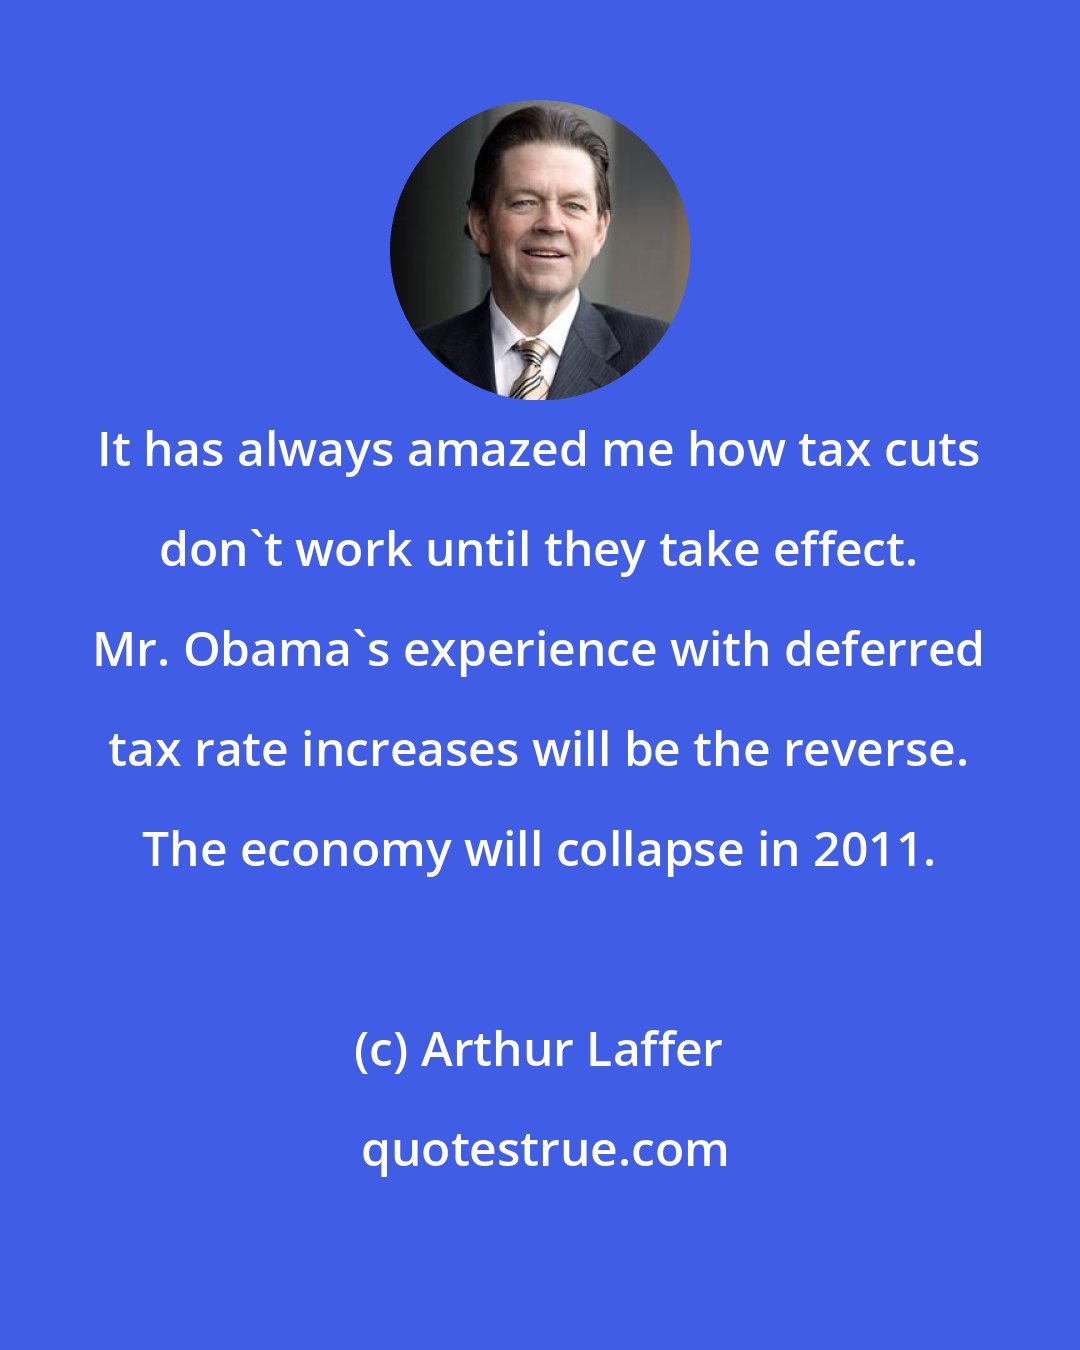 Arthur Laffer: It has always amazed me how tax cuts don't work until they take effect. Mr. Obama's experience with deferred tax rate increases will be the reverse. The economy will collapse in 2011.